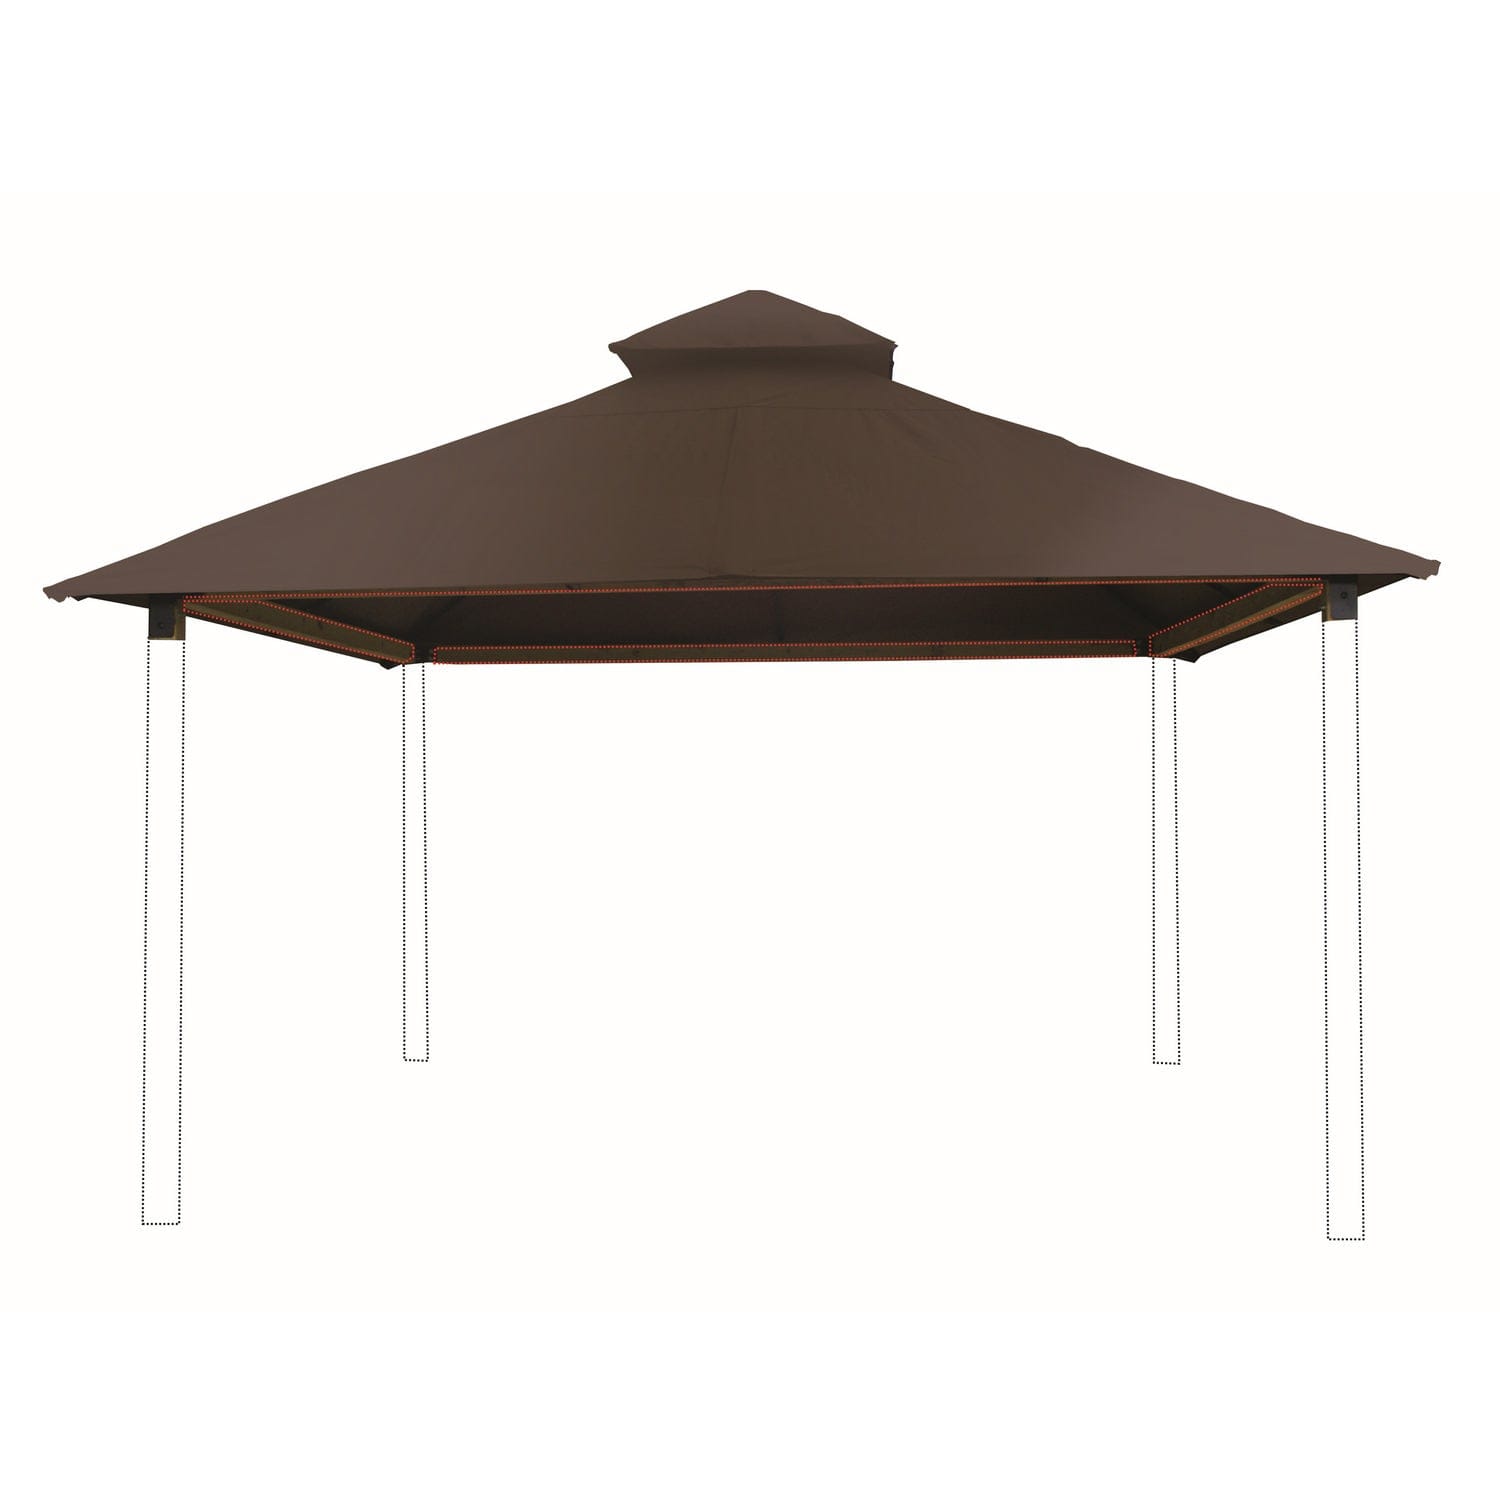 Riverstone Industries Soft Top Gazebos 12FT X 12FT Riverstone | ACACIA Gazebo Roof Framing and Mounting Kit With OutDURA Canopy - Desert Beige AGOK12-DESERT-BEIGE